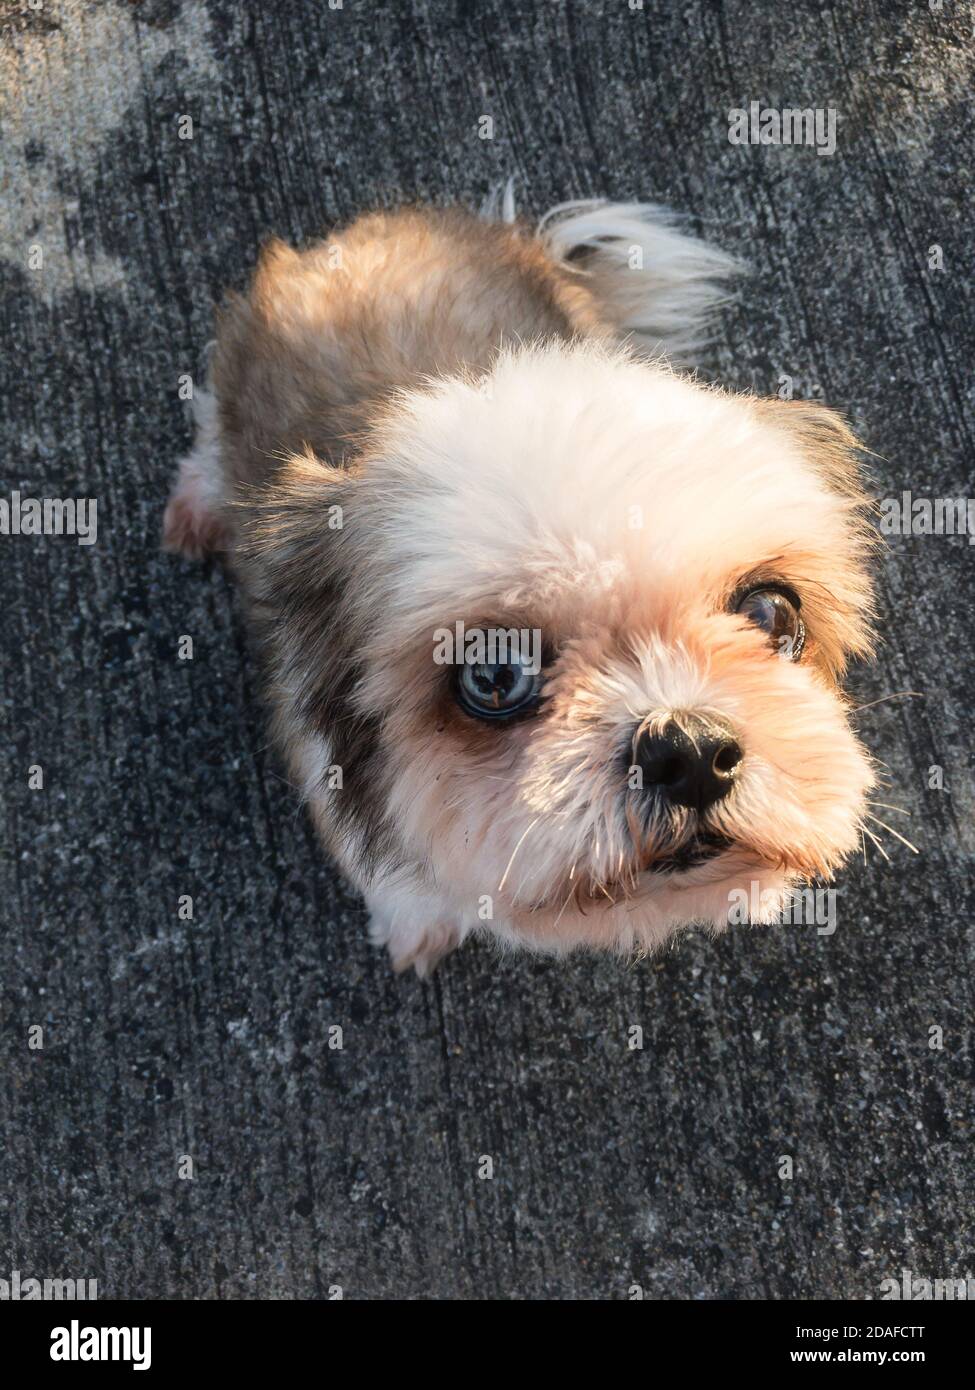 Portrait of puppy Shih Tzu dog sitting and eye contact Stock Photo